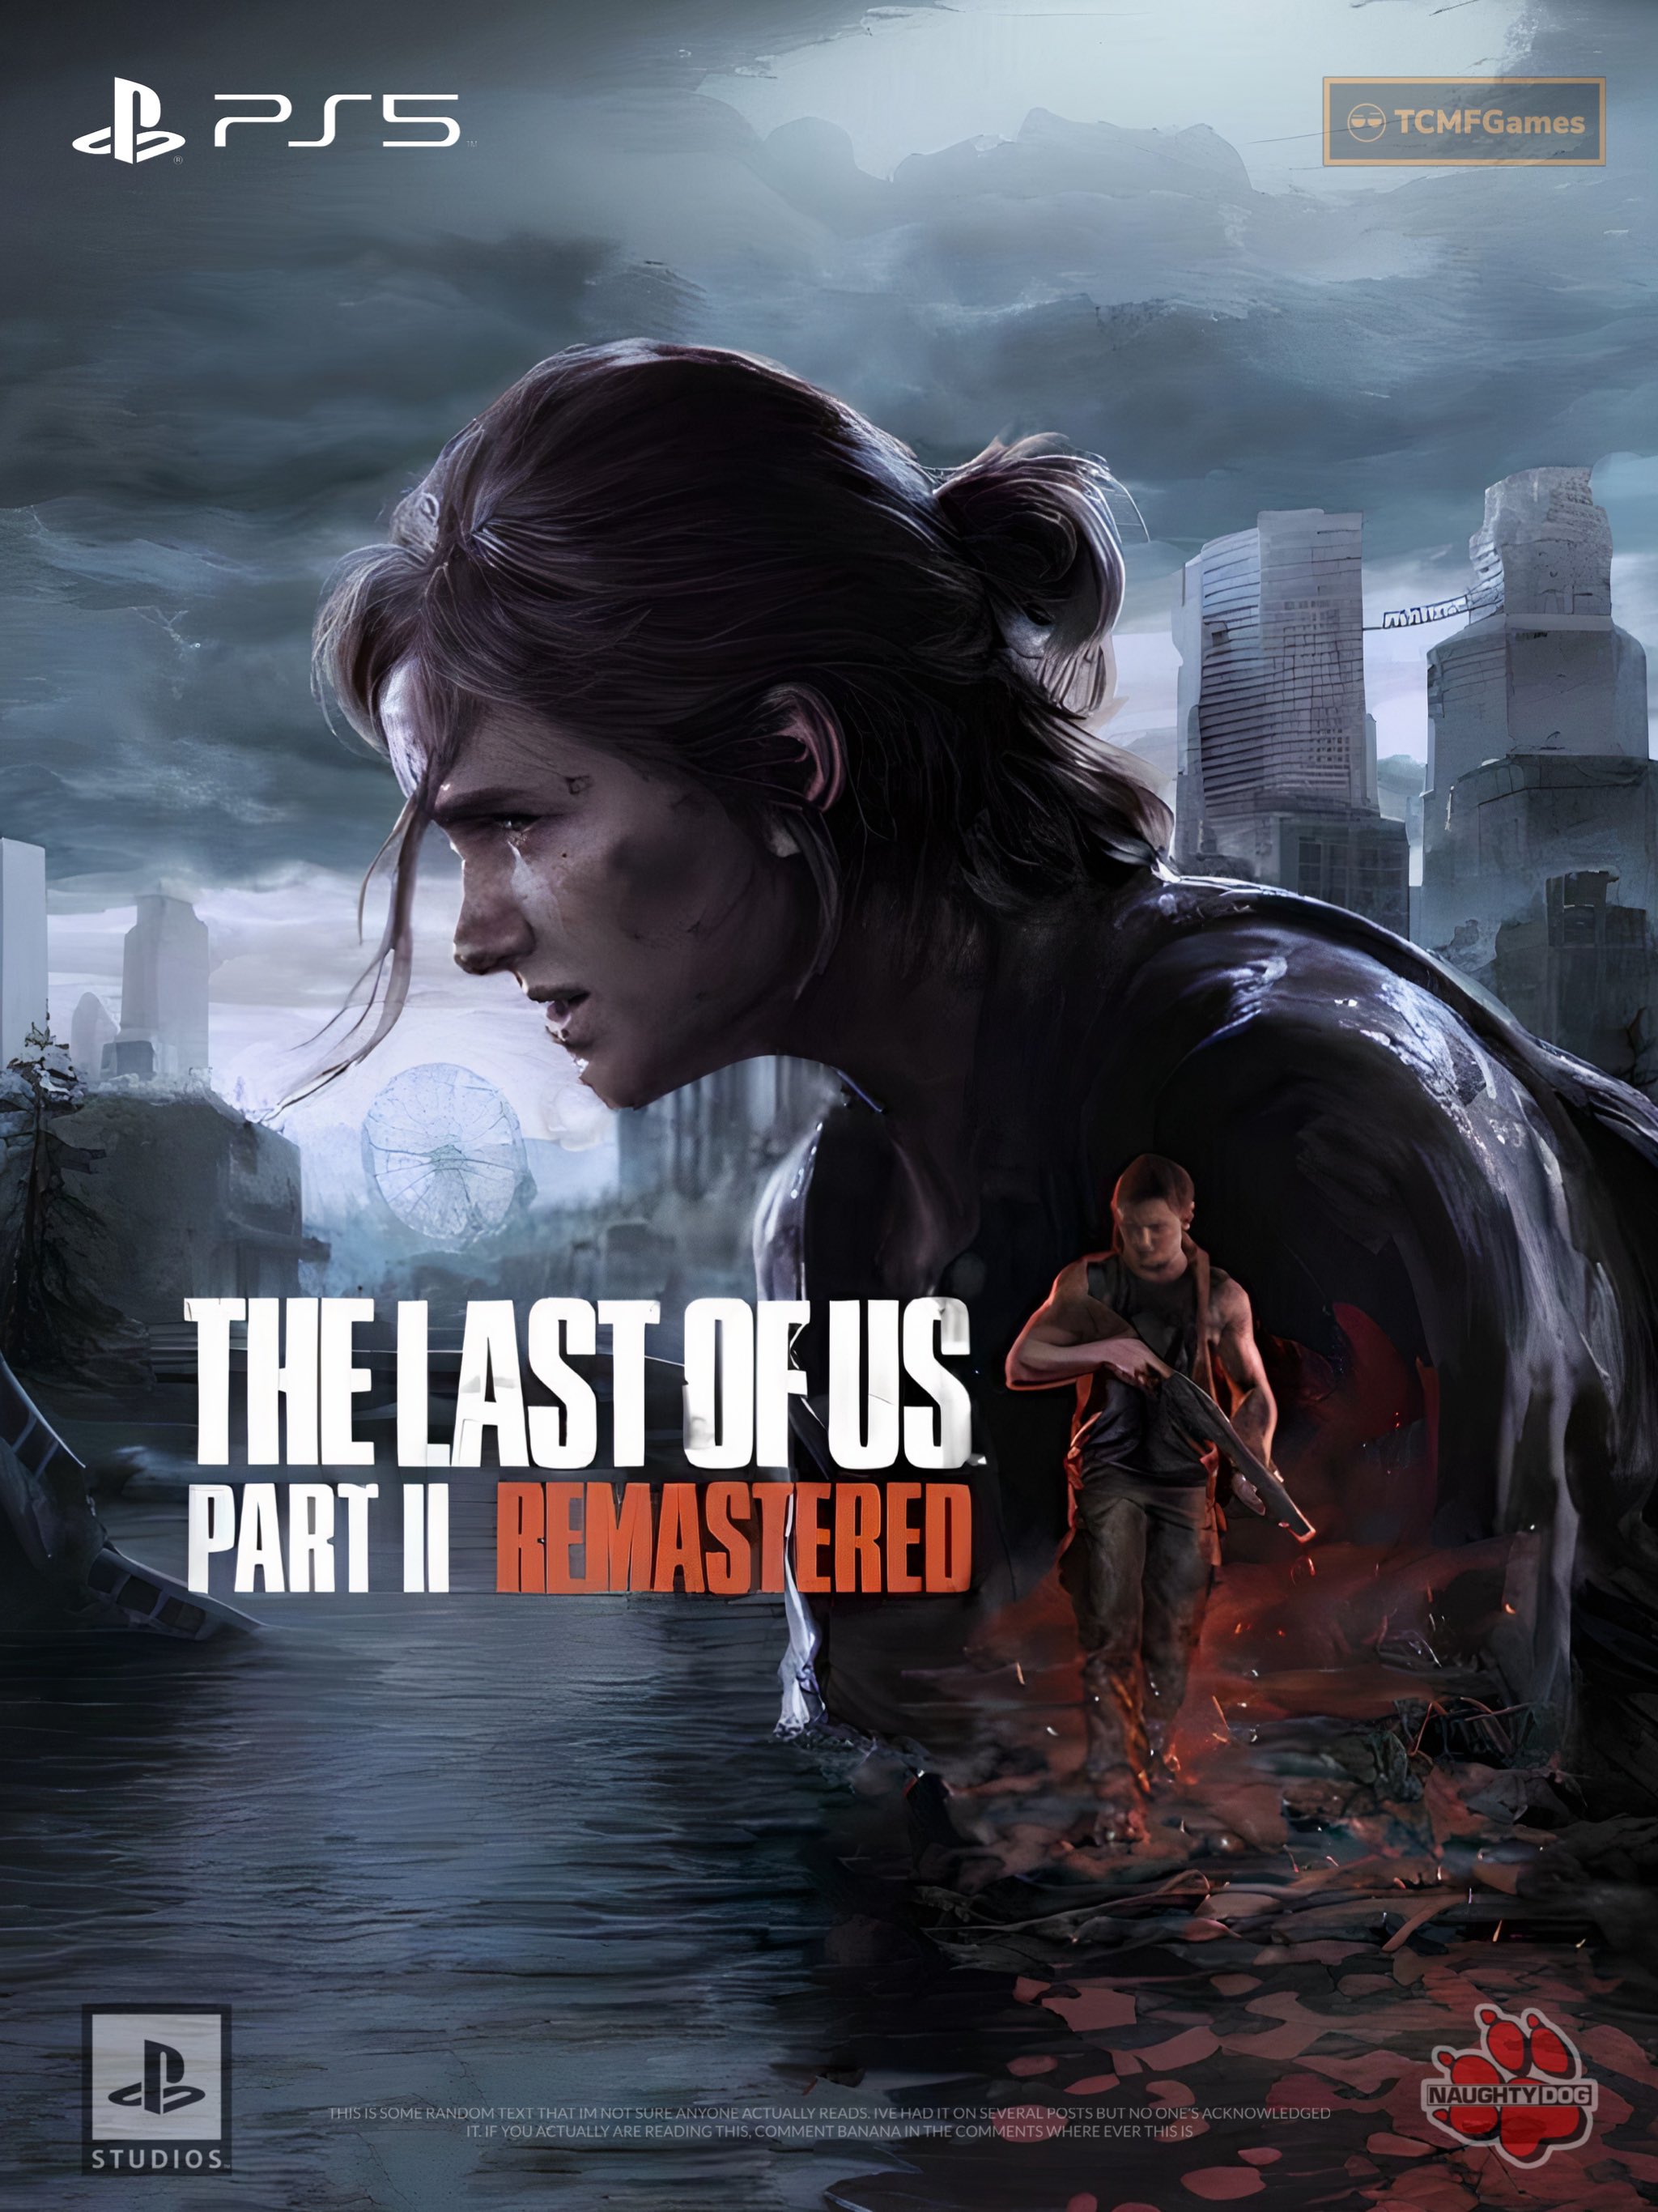 TCMFGames on X: Last of Us 2 Remastered PS5 Announcement imminent